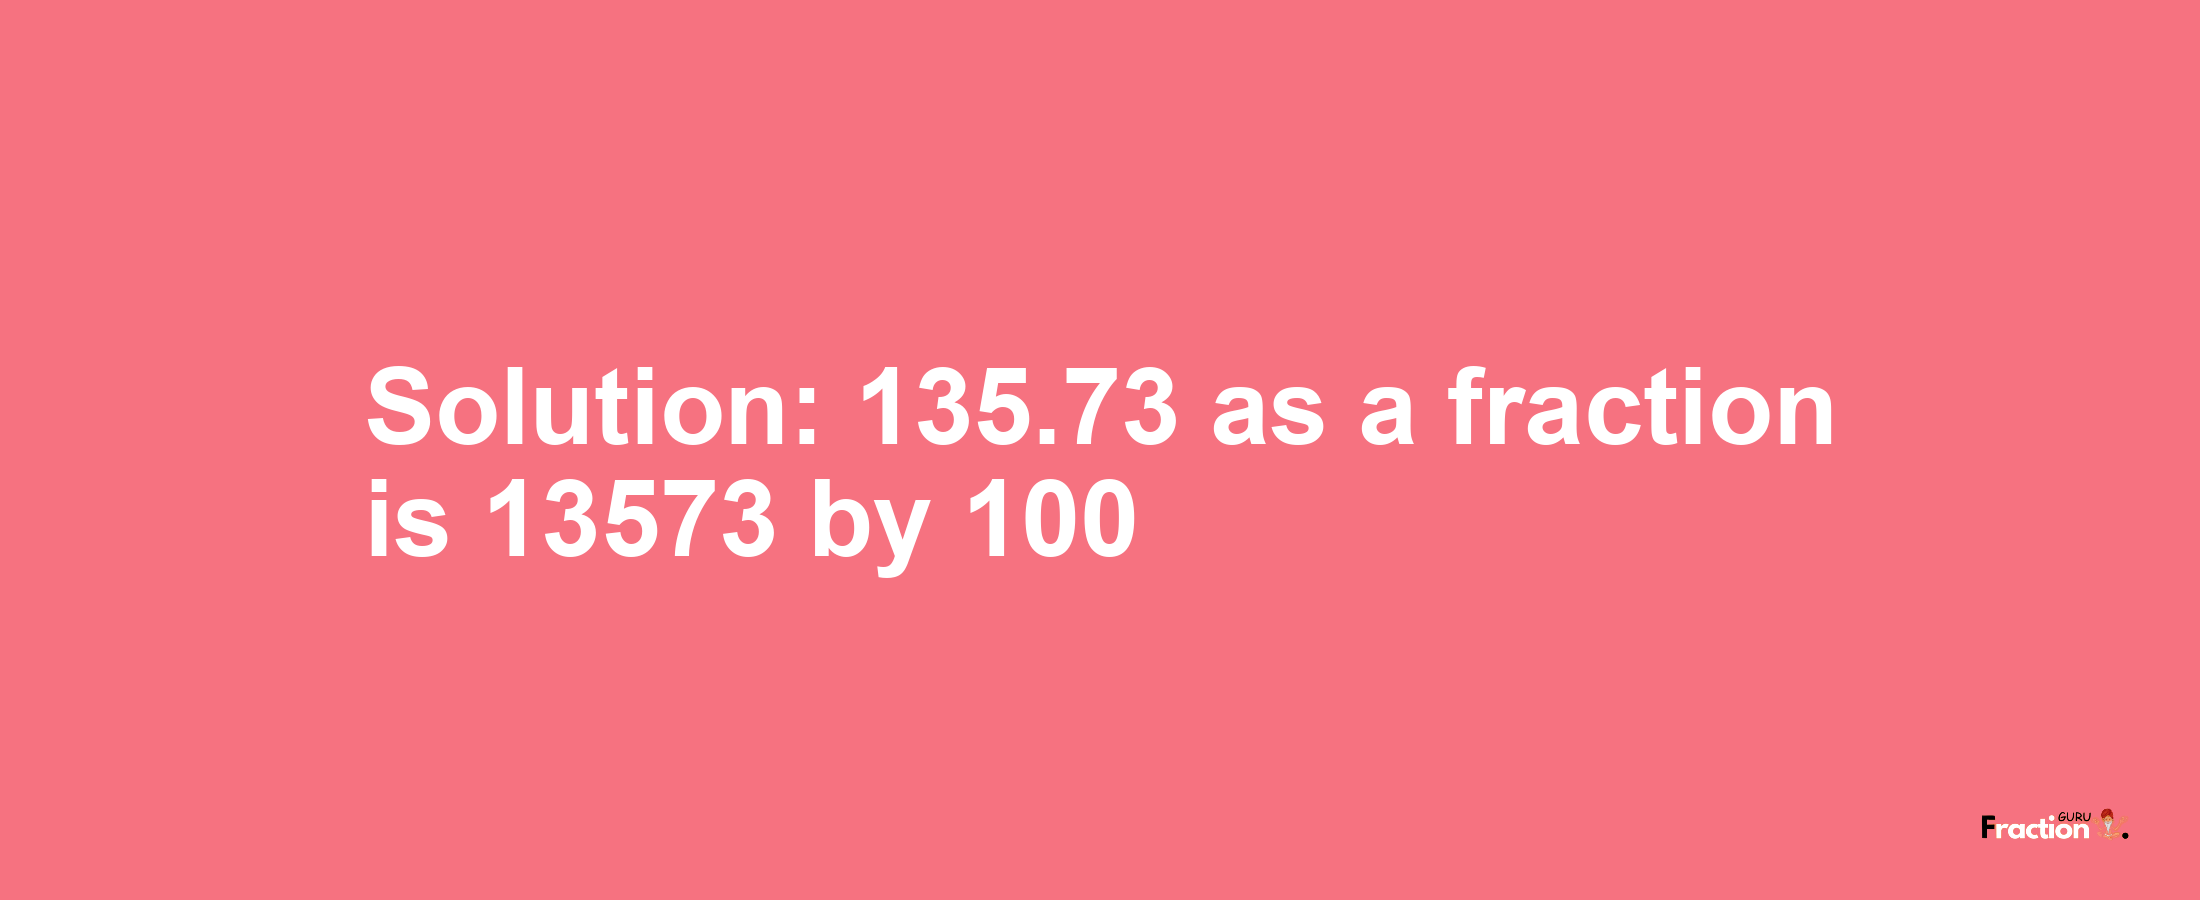 Solution:135.73 as a fraction is 13573/100